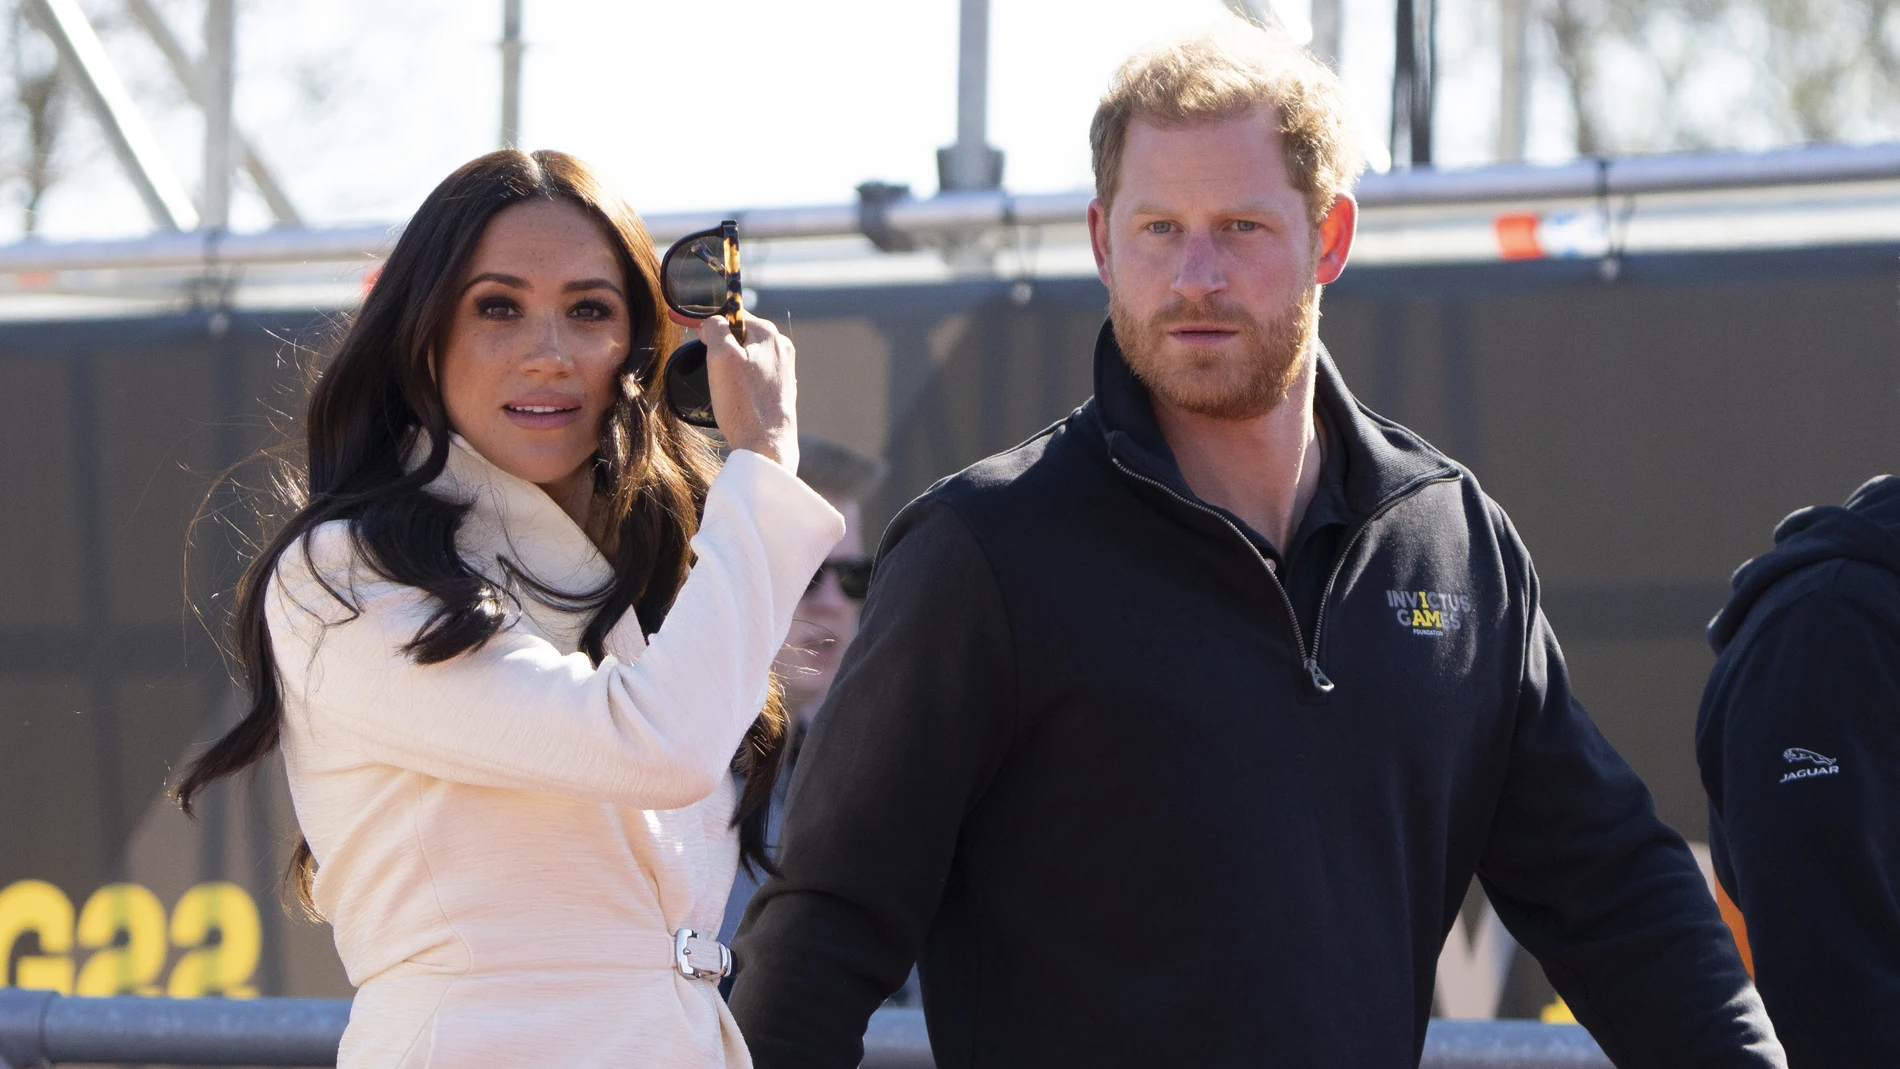 Prince Harry and Meghan Markle, visit the track and field event at the Invictus Games in The Hague, Netherlands.